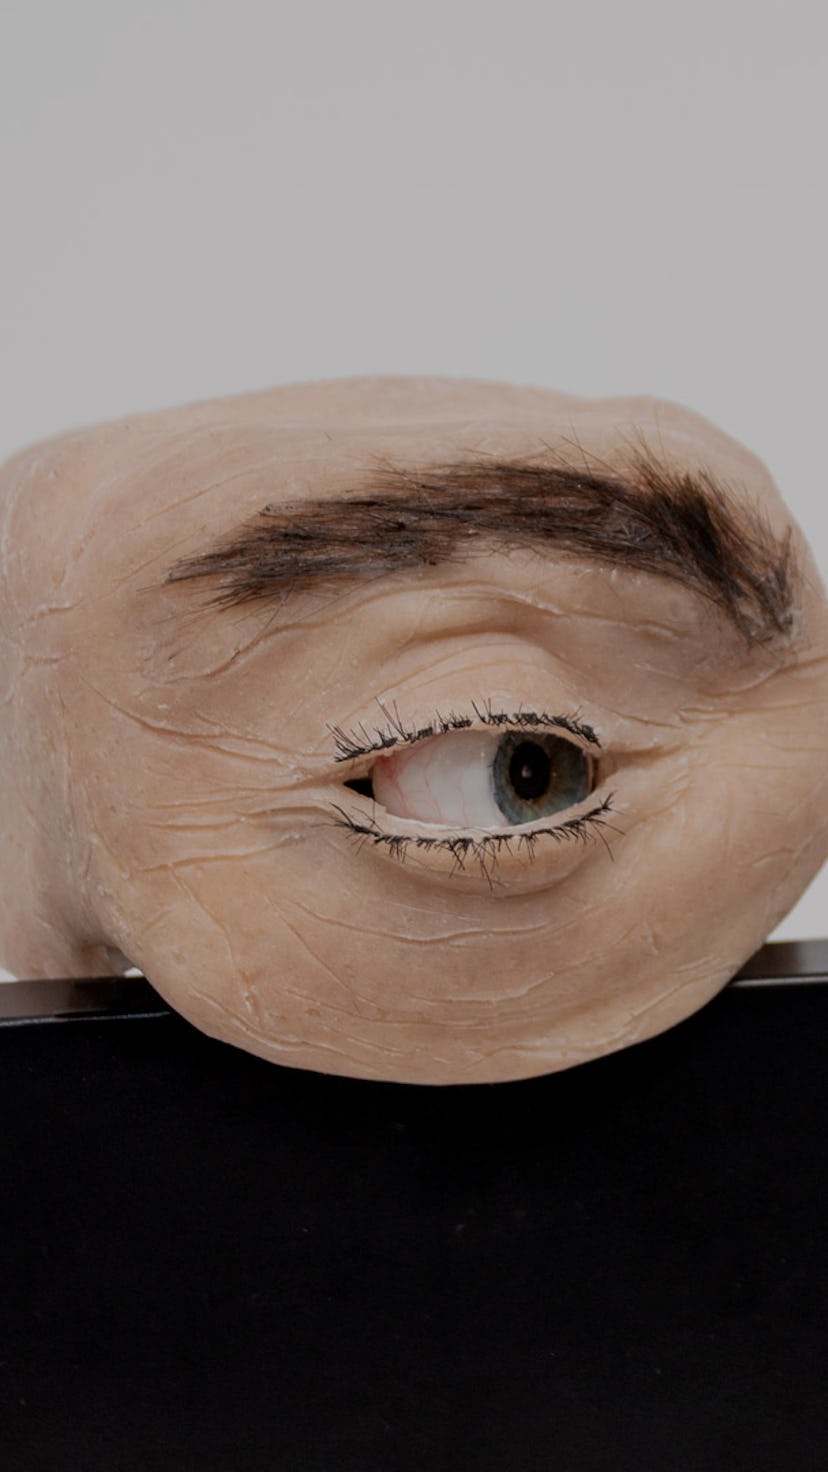 A human-like eye in the form of a webcam.